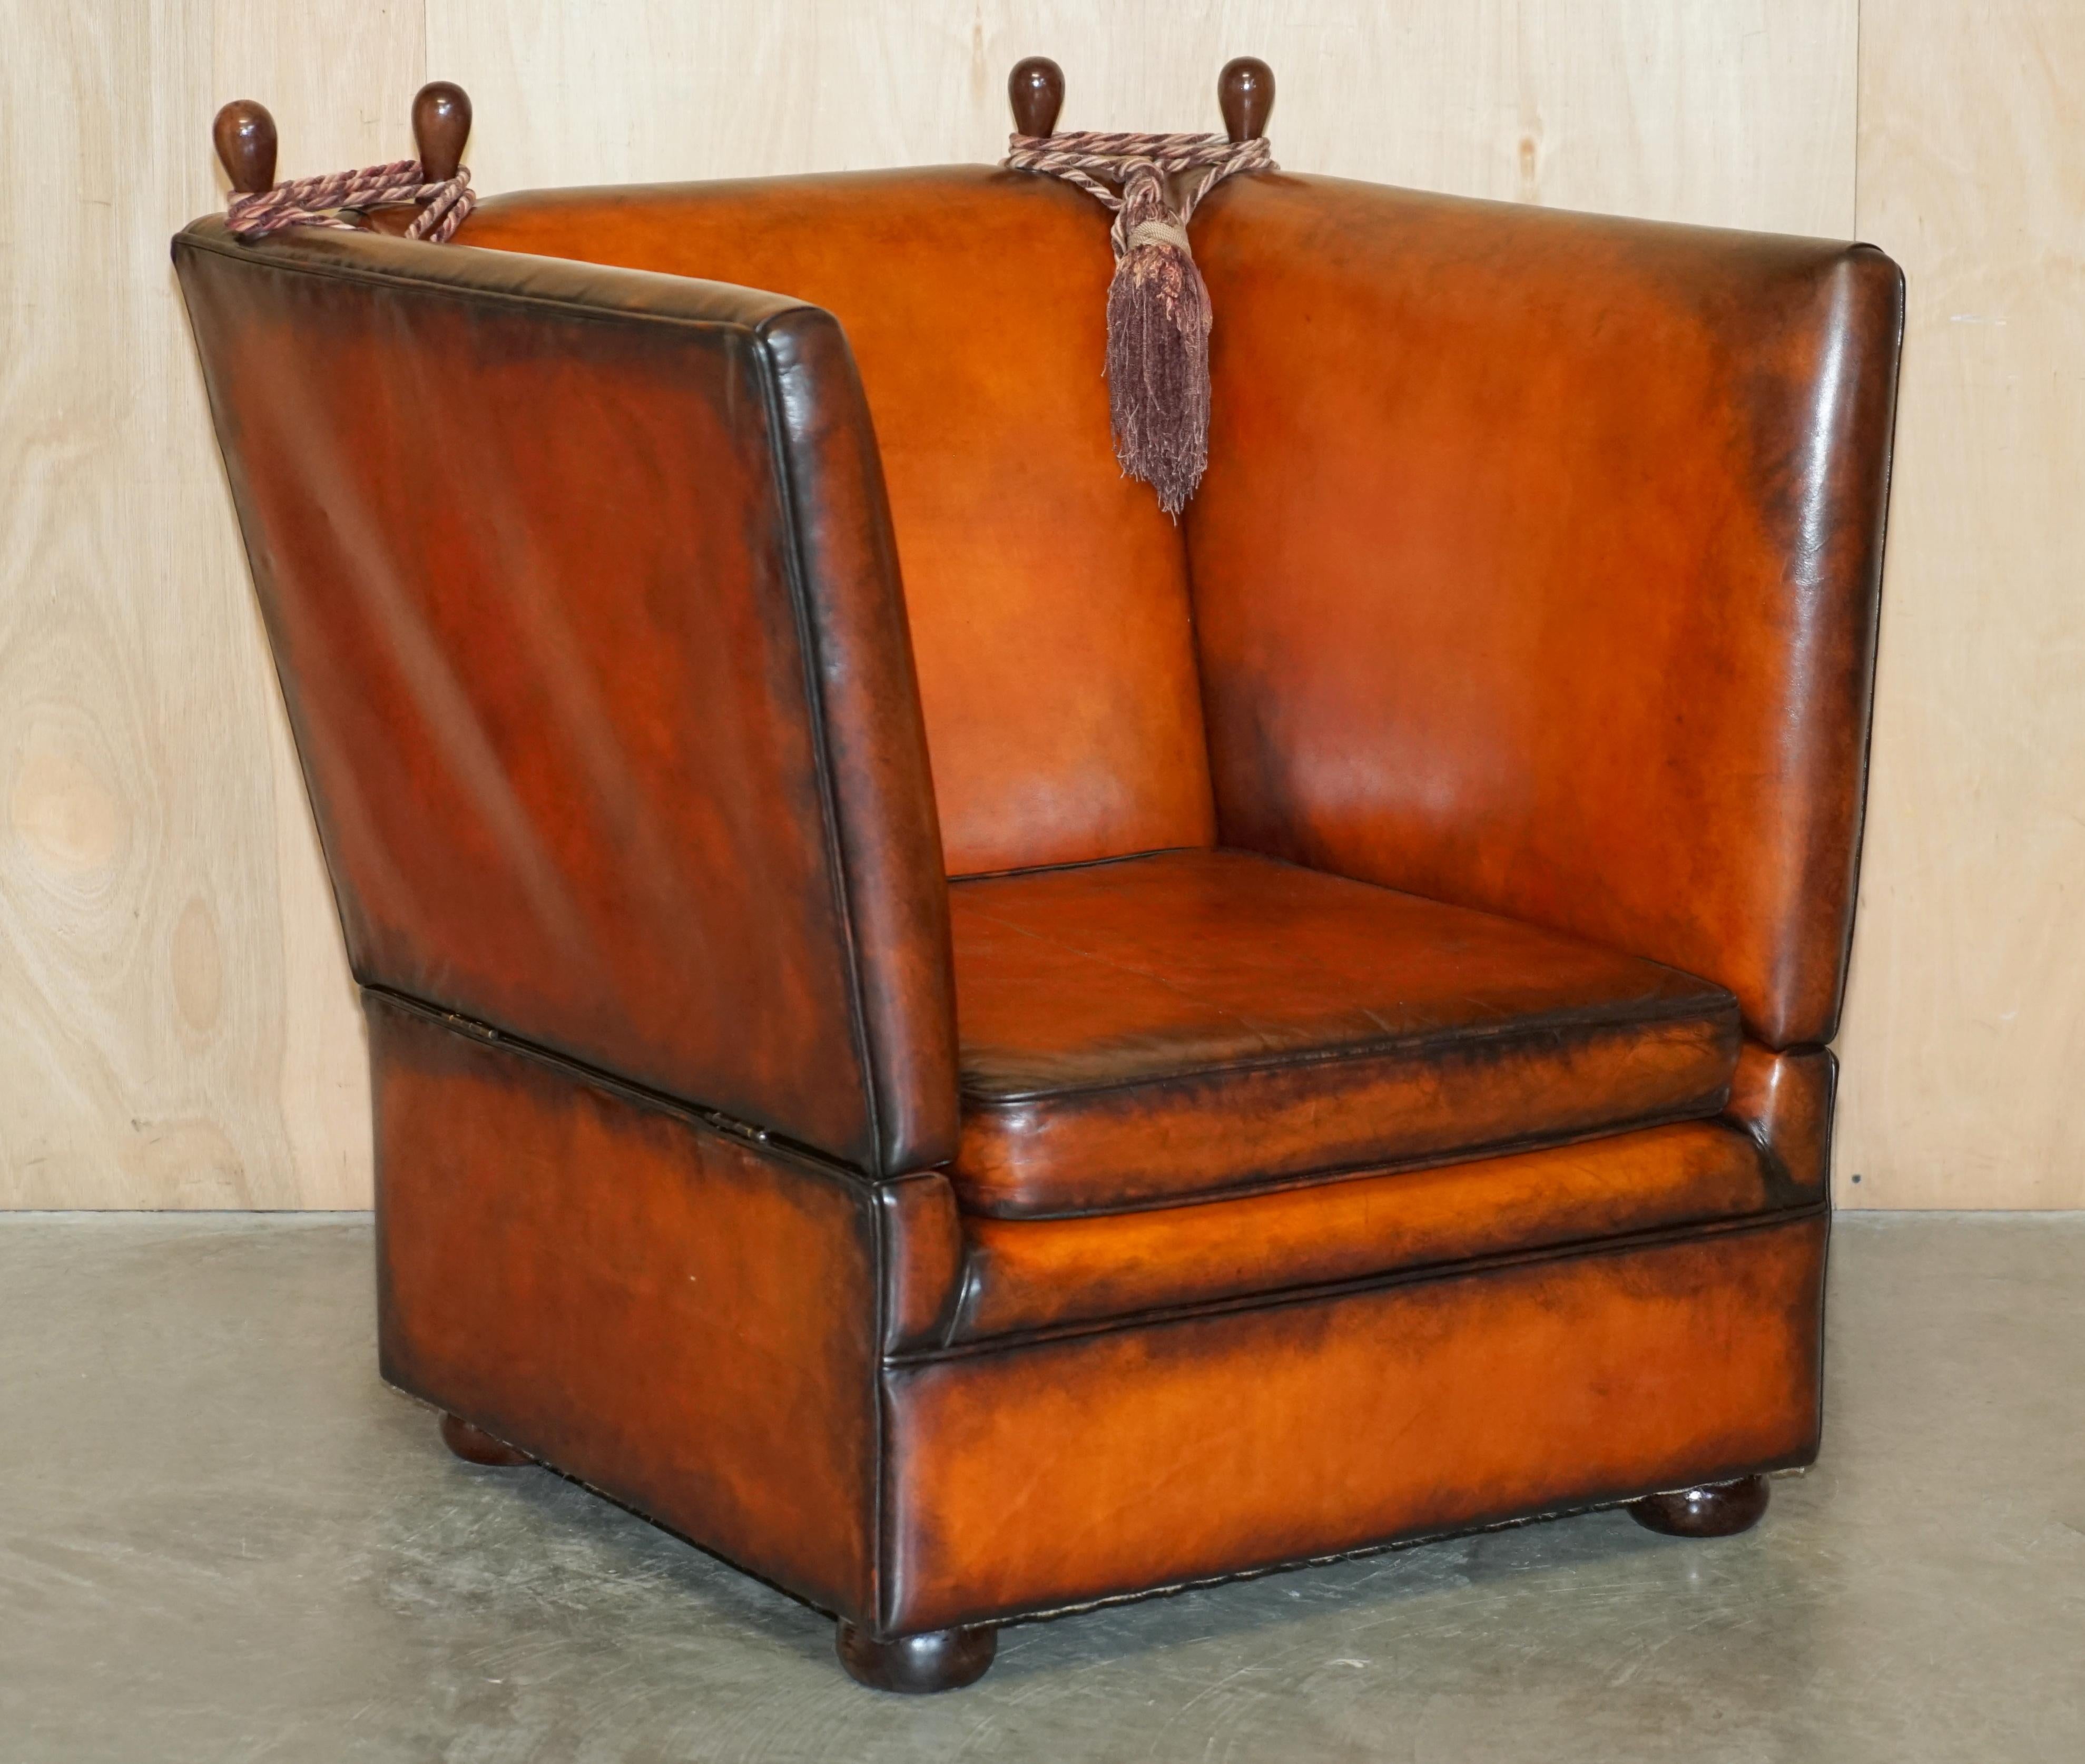 Royal House Antiques

Royal House Antiques is delighted to offer for sale this stunning fully restored pair of Art Deco style, hand dyed rich Whisky brown leather, extending Knoll club armchairs.

Please note the delivery fee listed is just a guide,